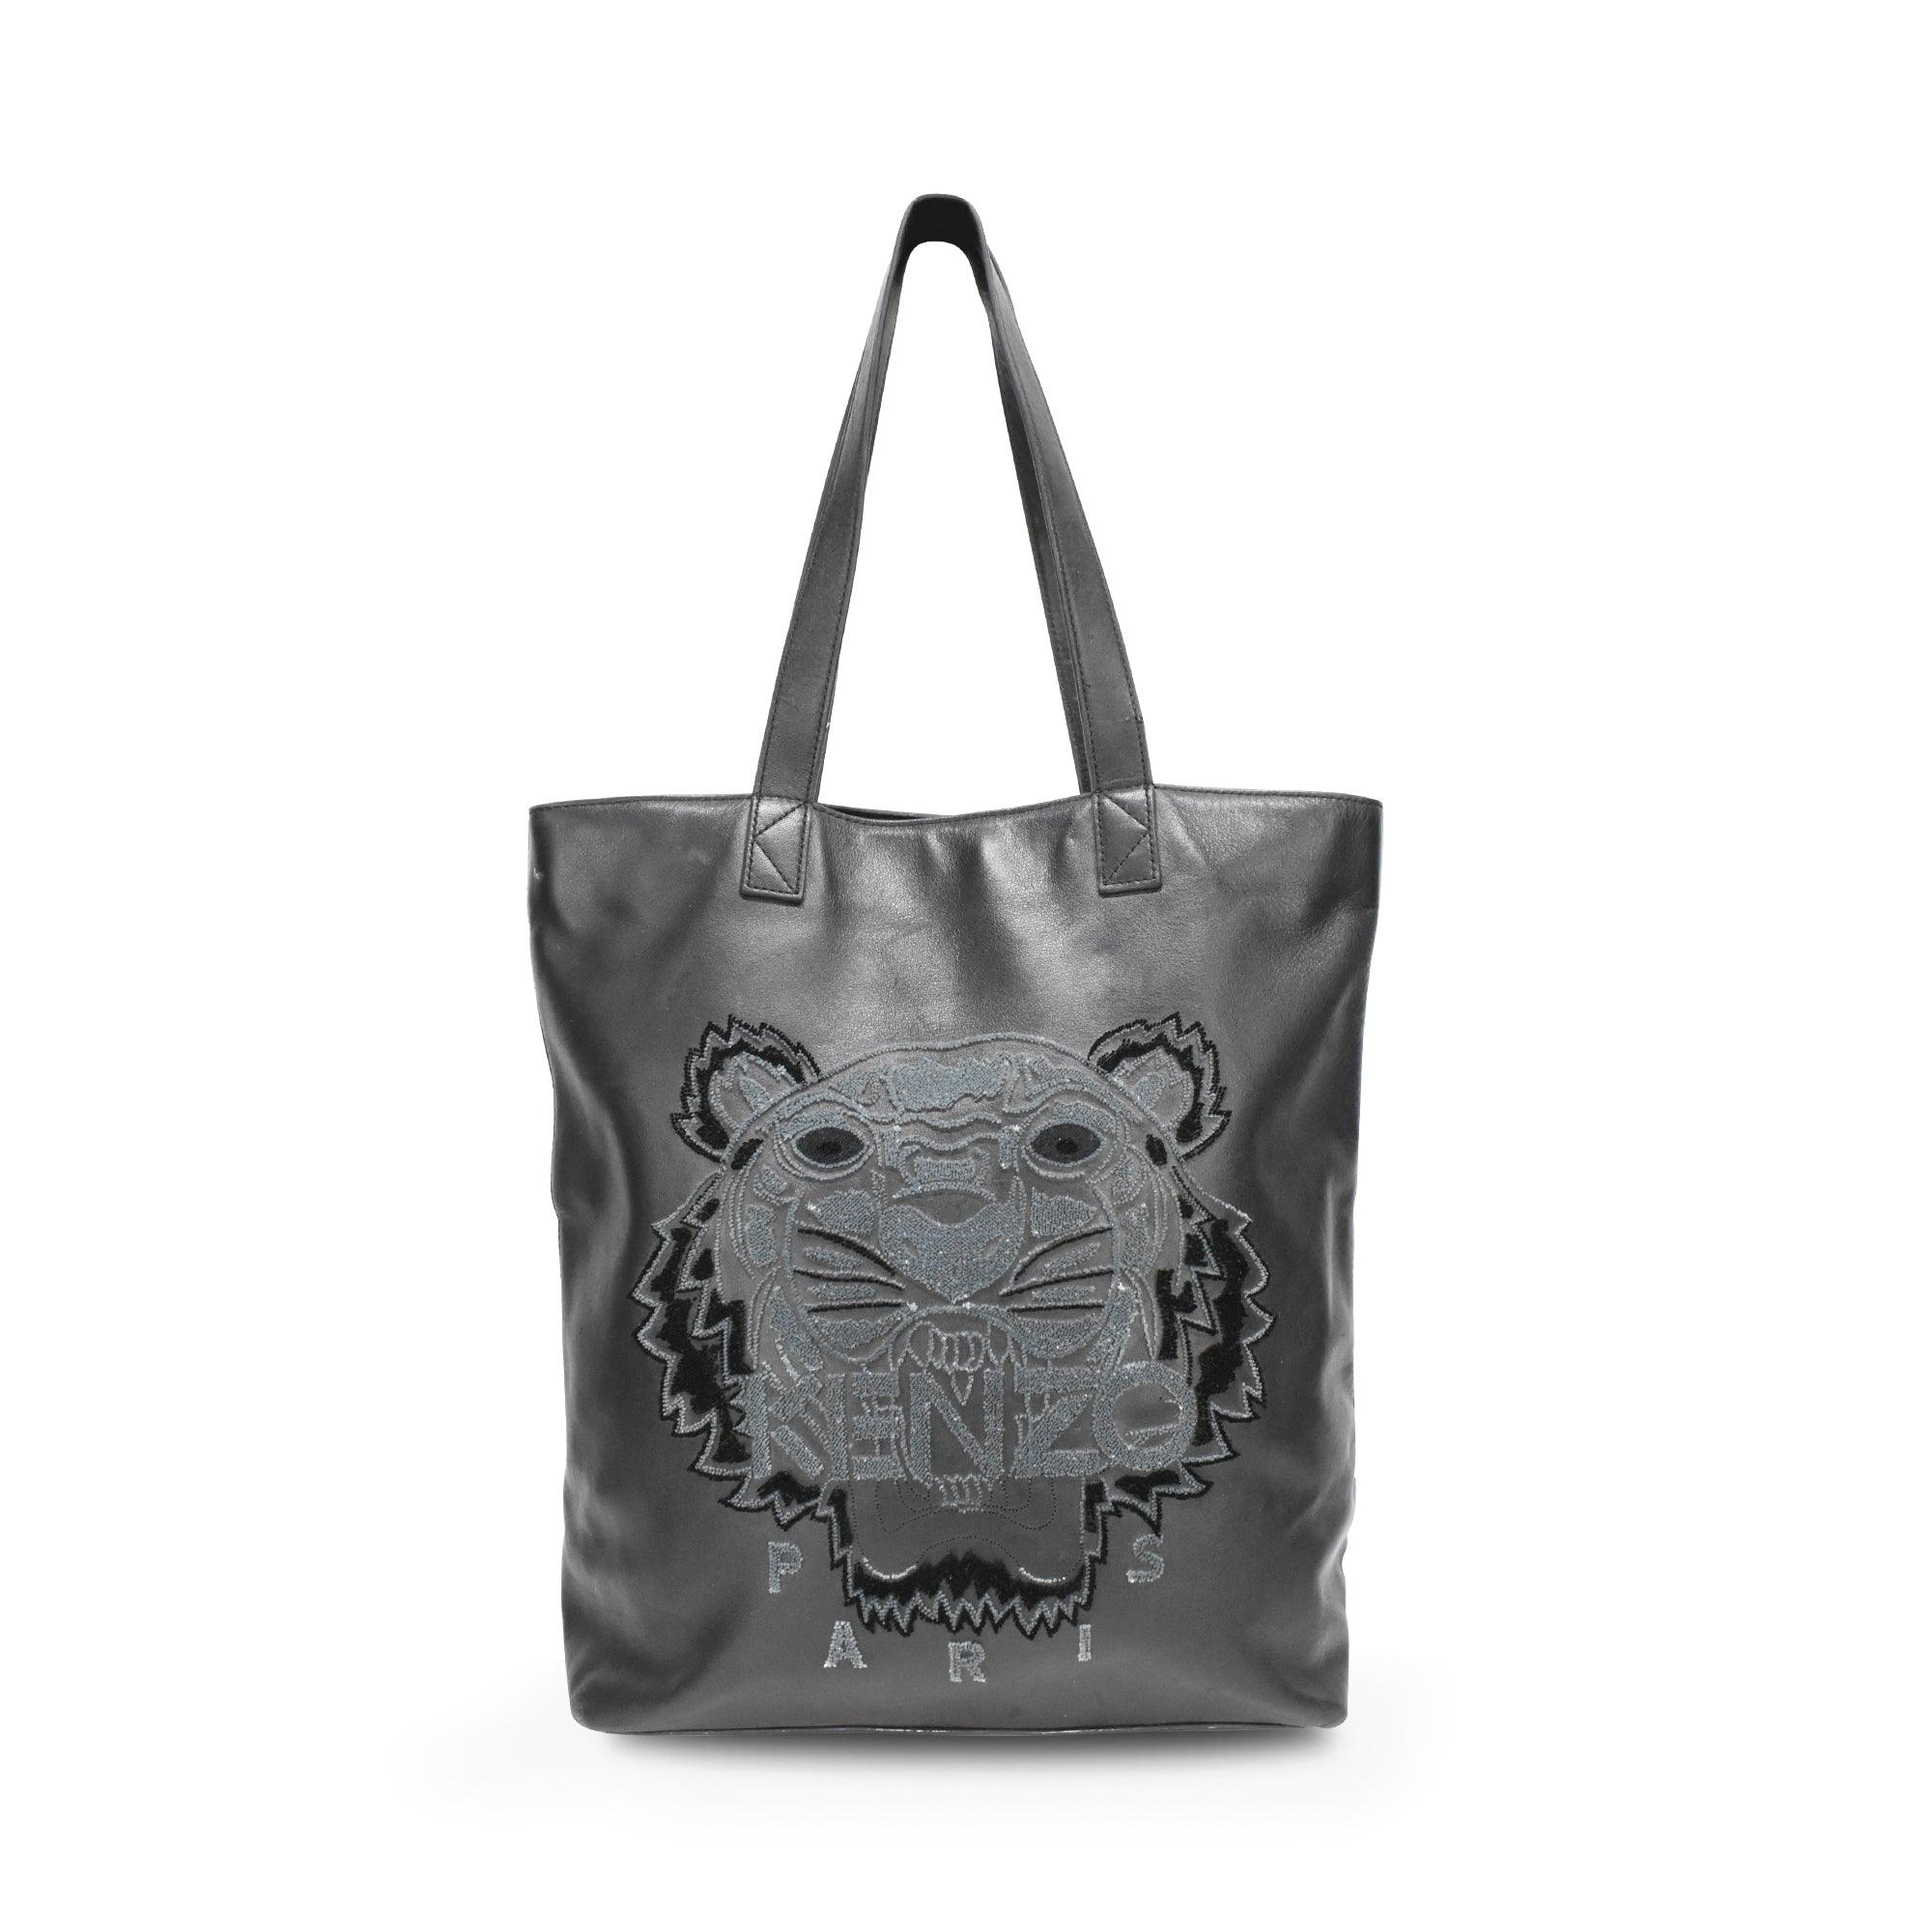 Kenzo Tote Bag - Fashionably Yours